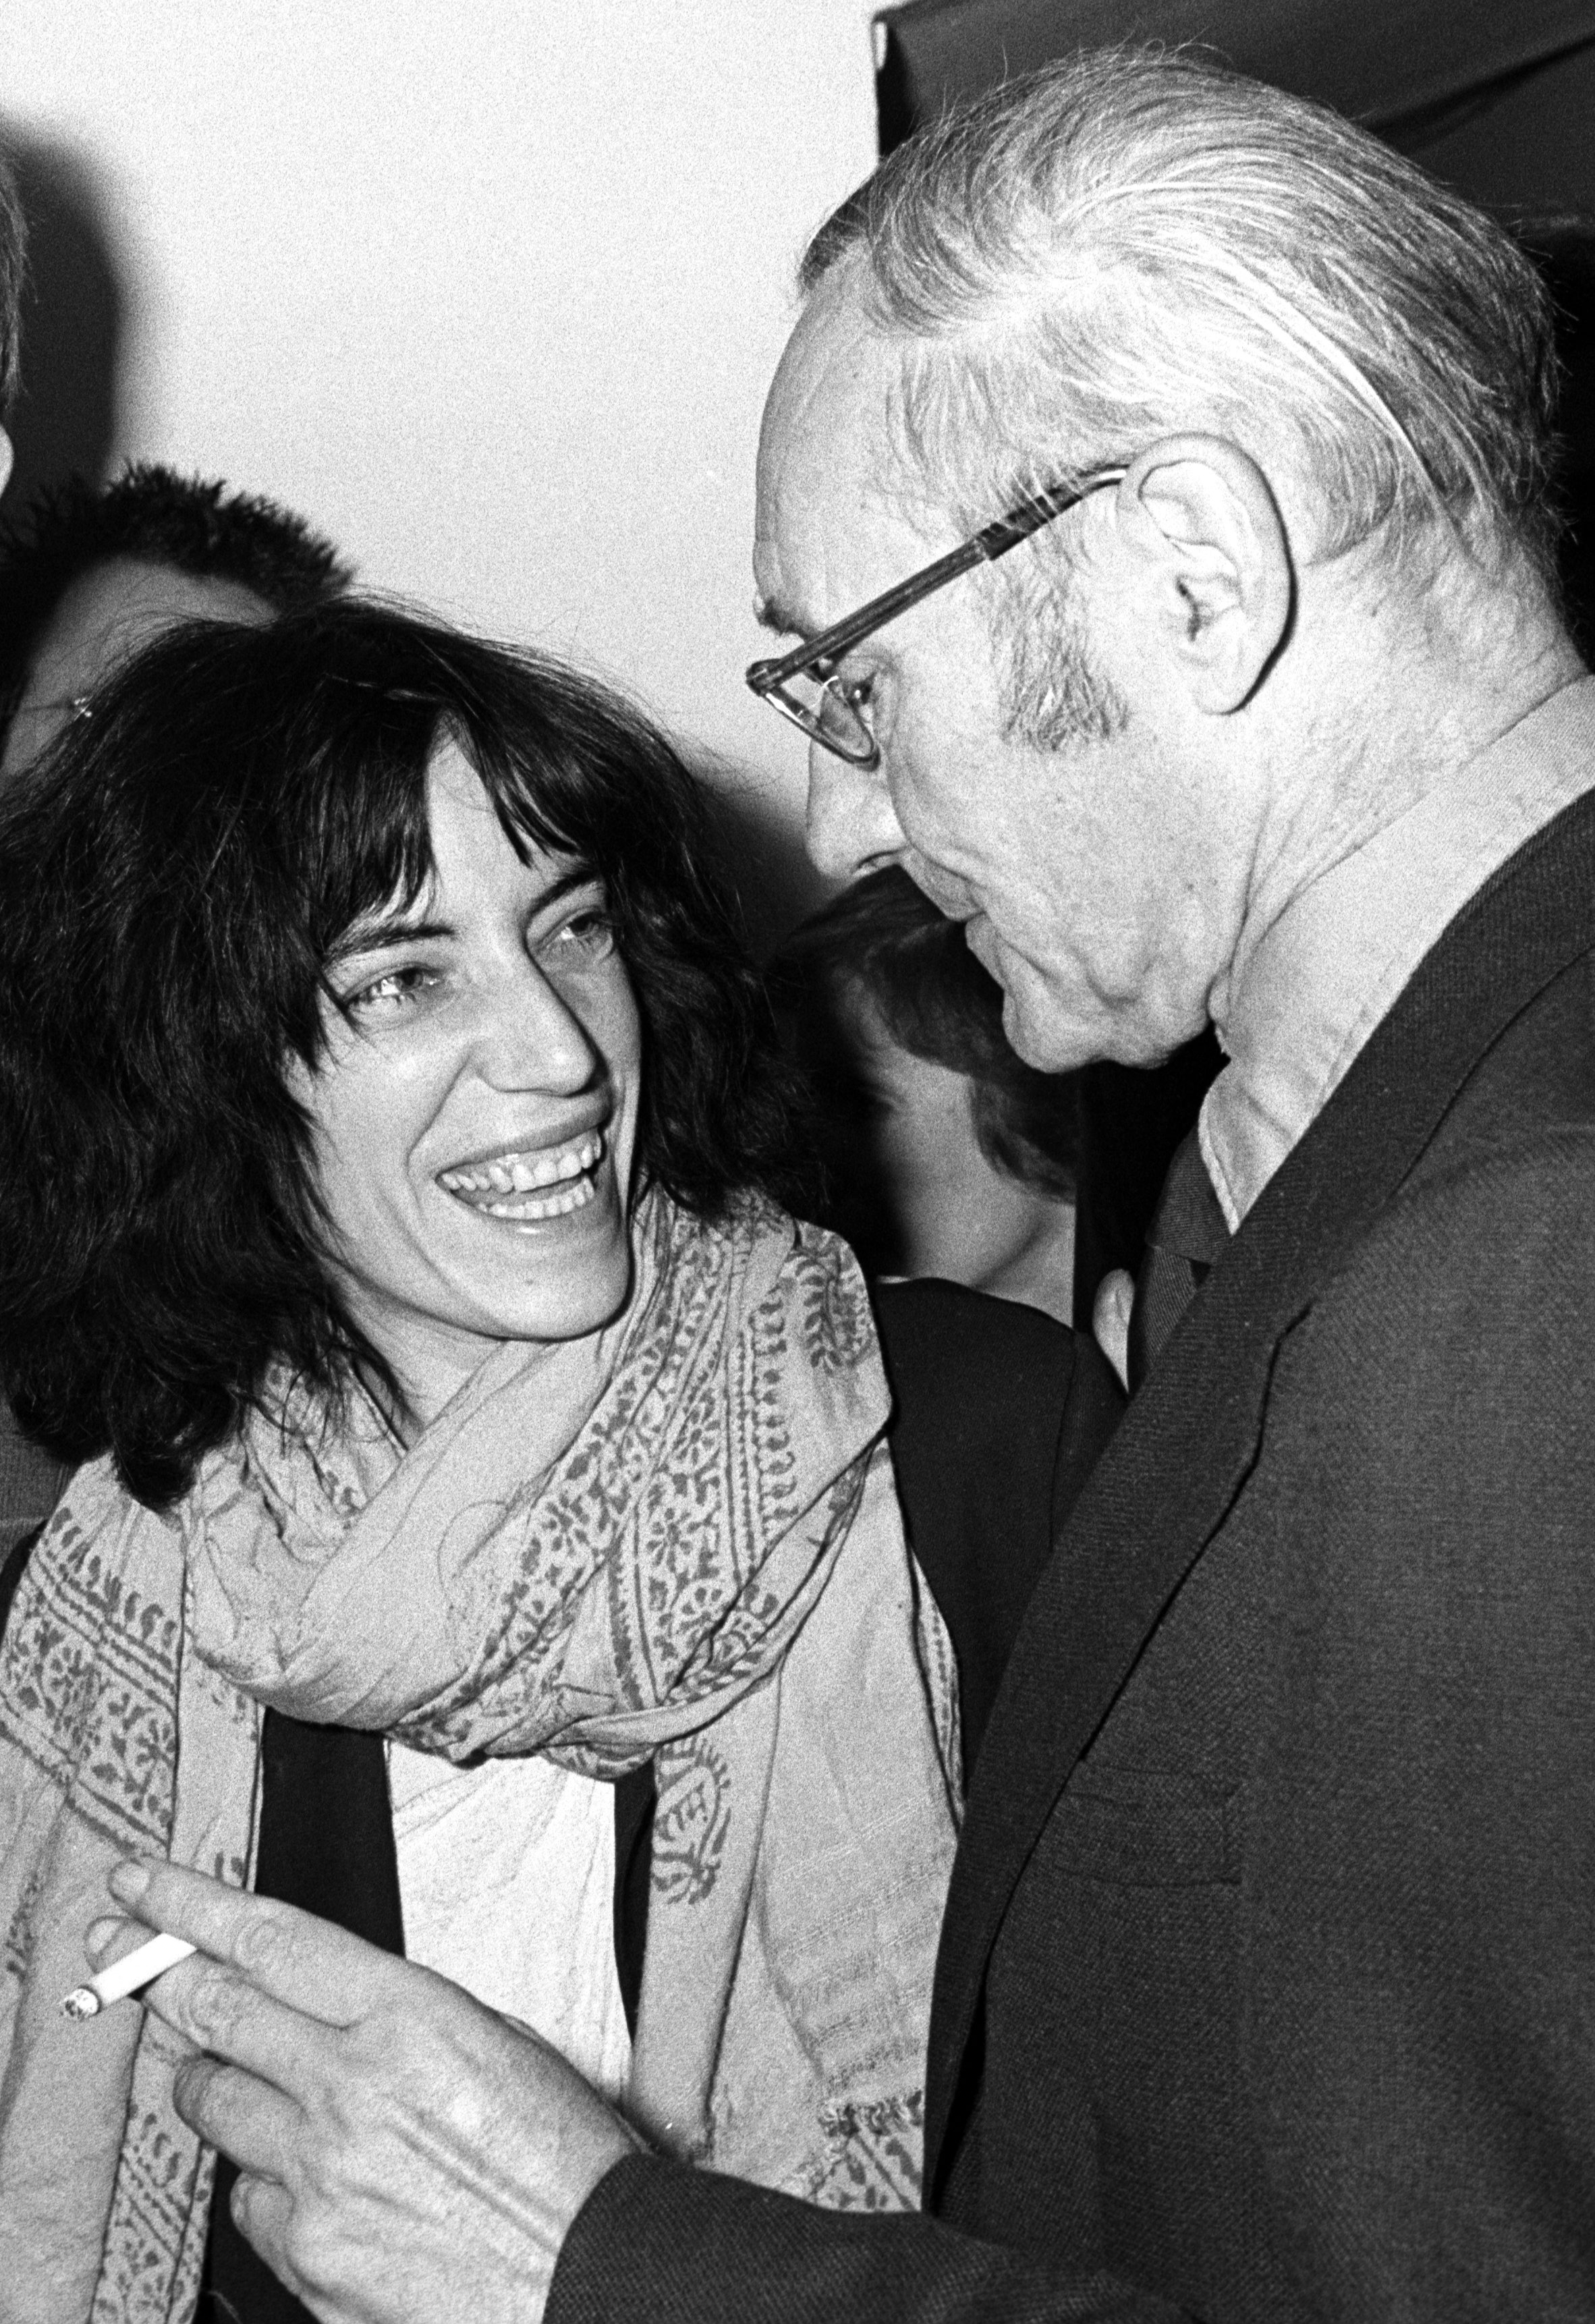 Patti Smith and William S. Burroughs in Conversation: Our 1988 Feature